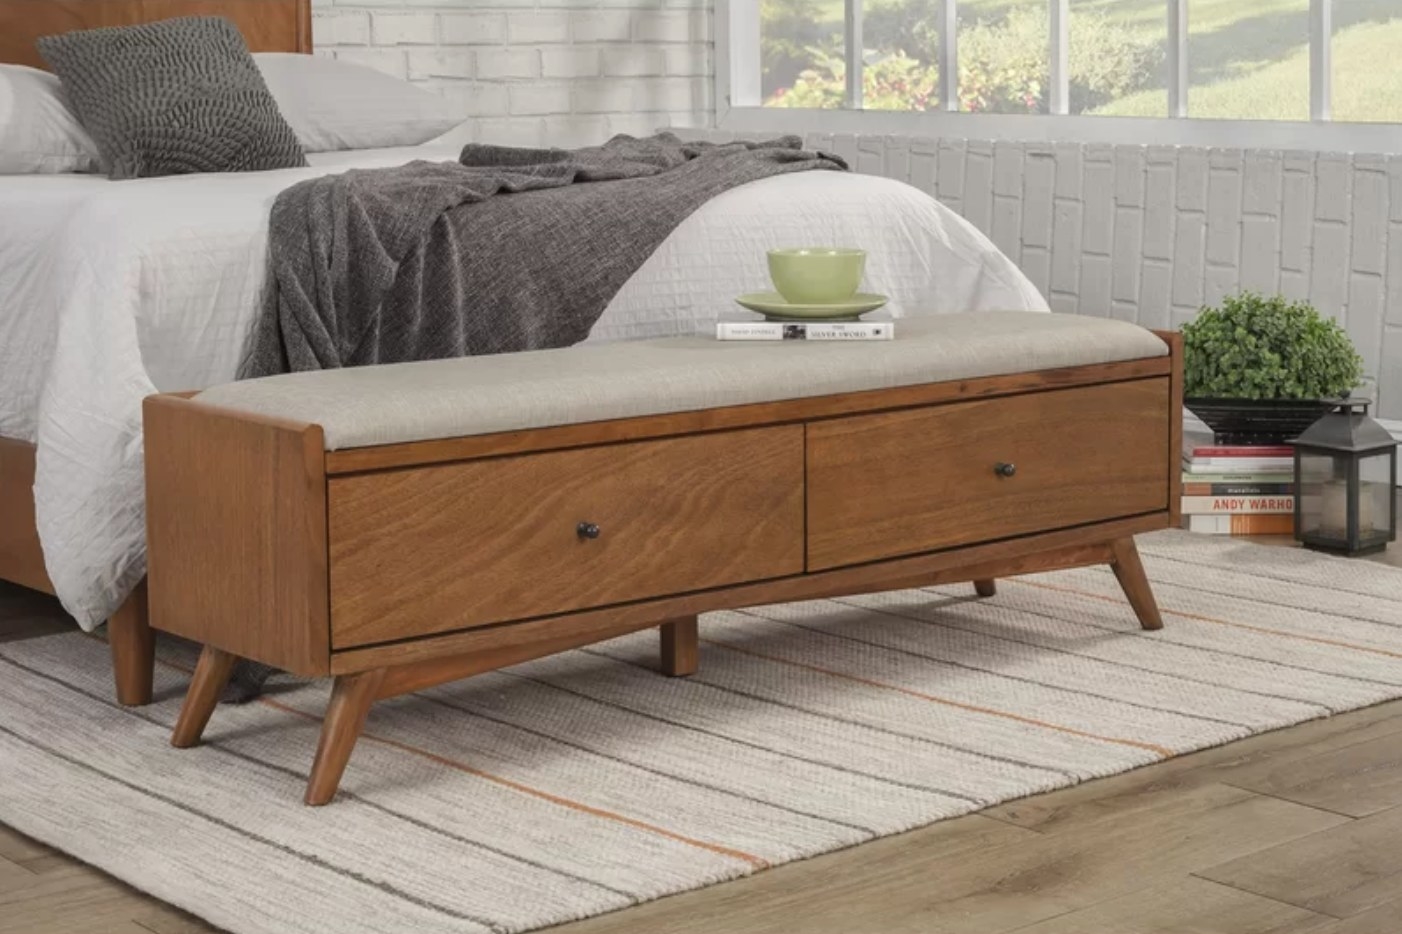 The upholstered drawer storage bench in acorn